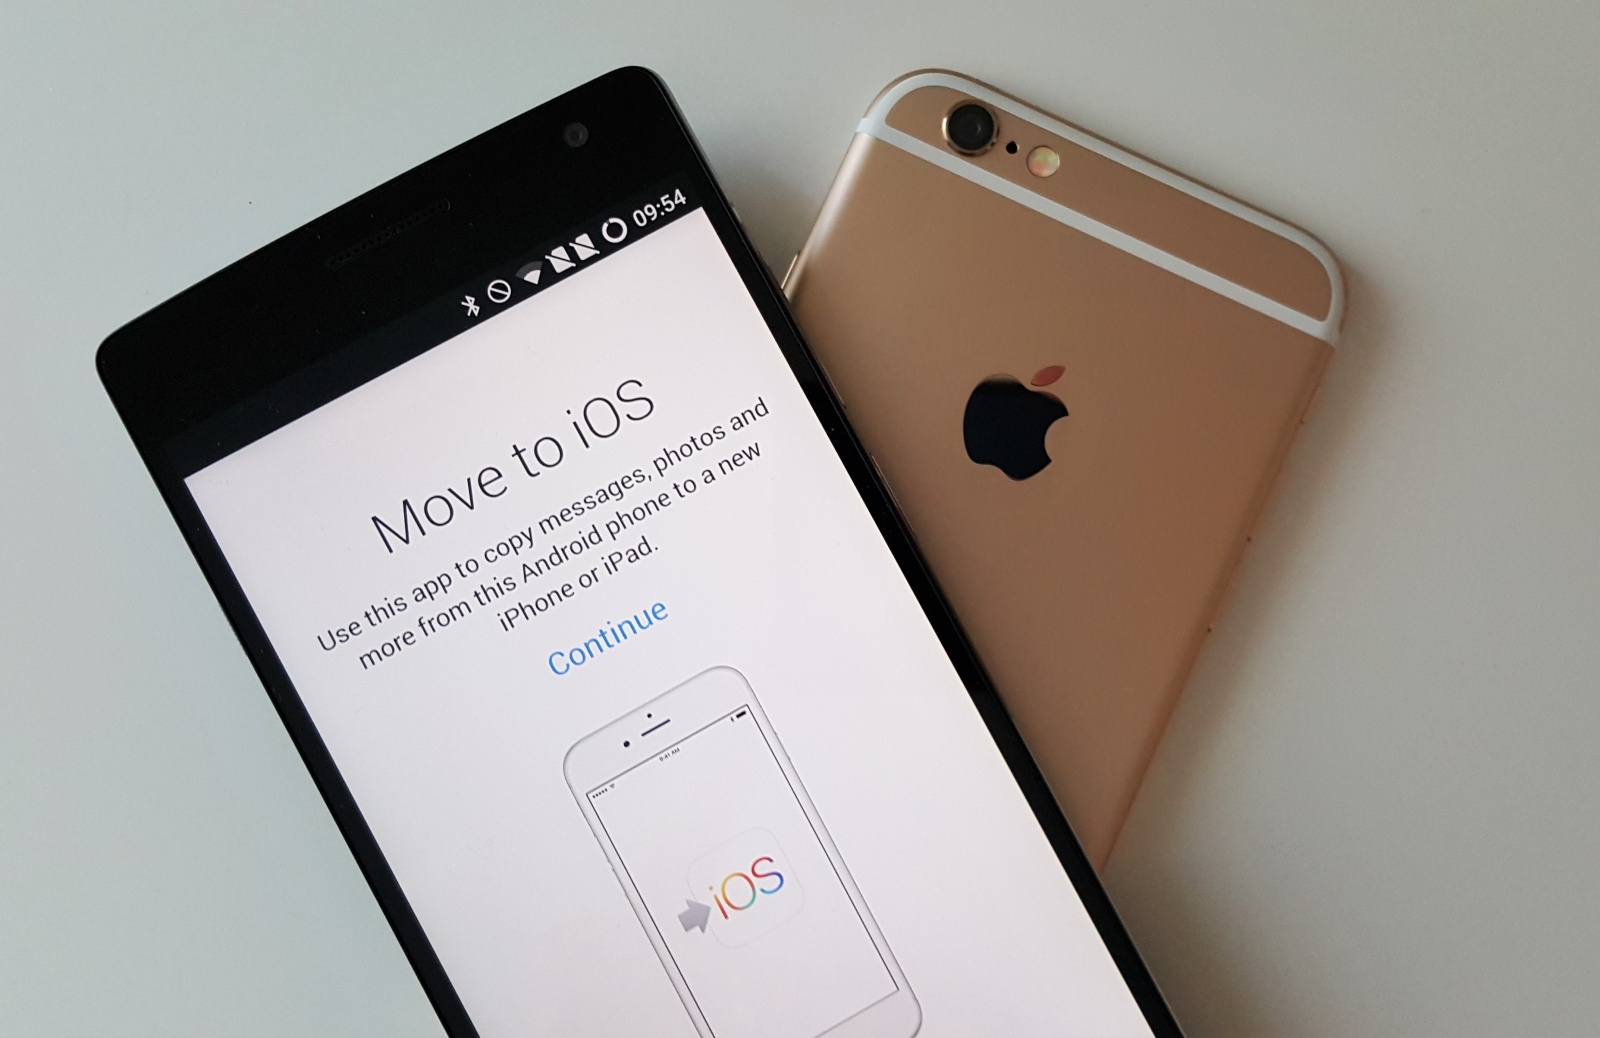 apple-cloned-another-android-app-for-move-to-ios-image-cultofandroidcomwp-contentuploads201509Move-to-iOS1-jpg